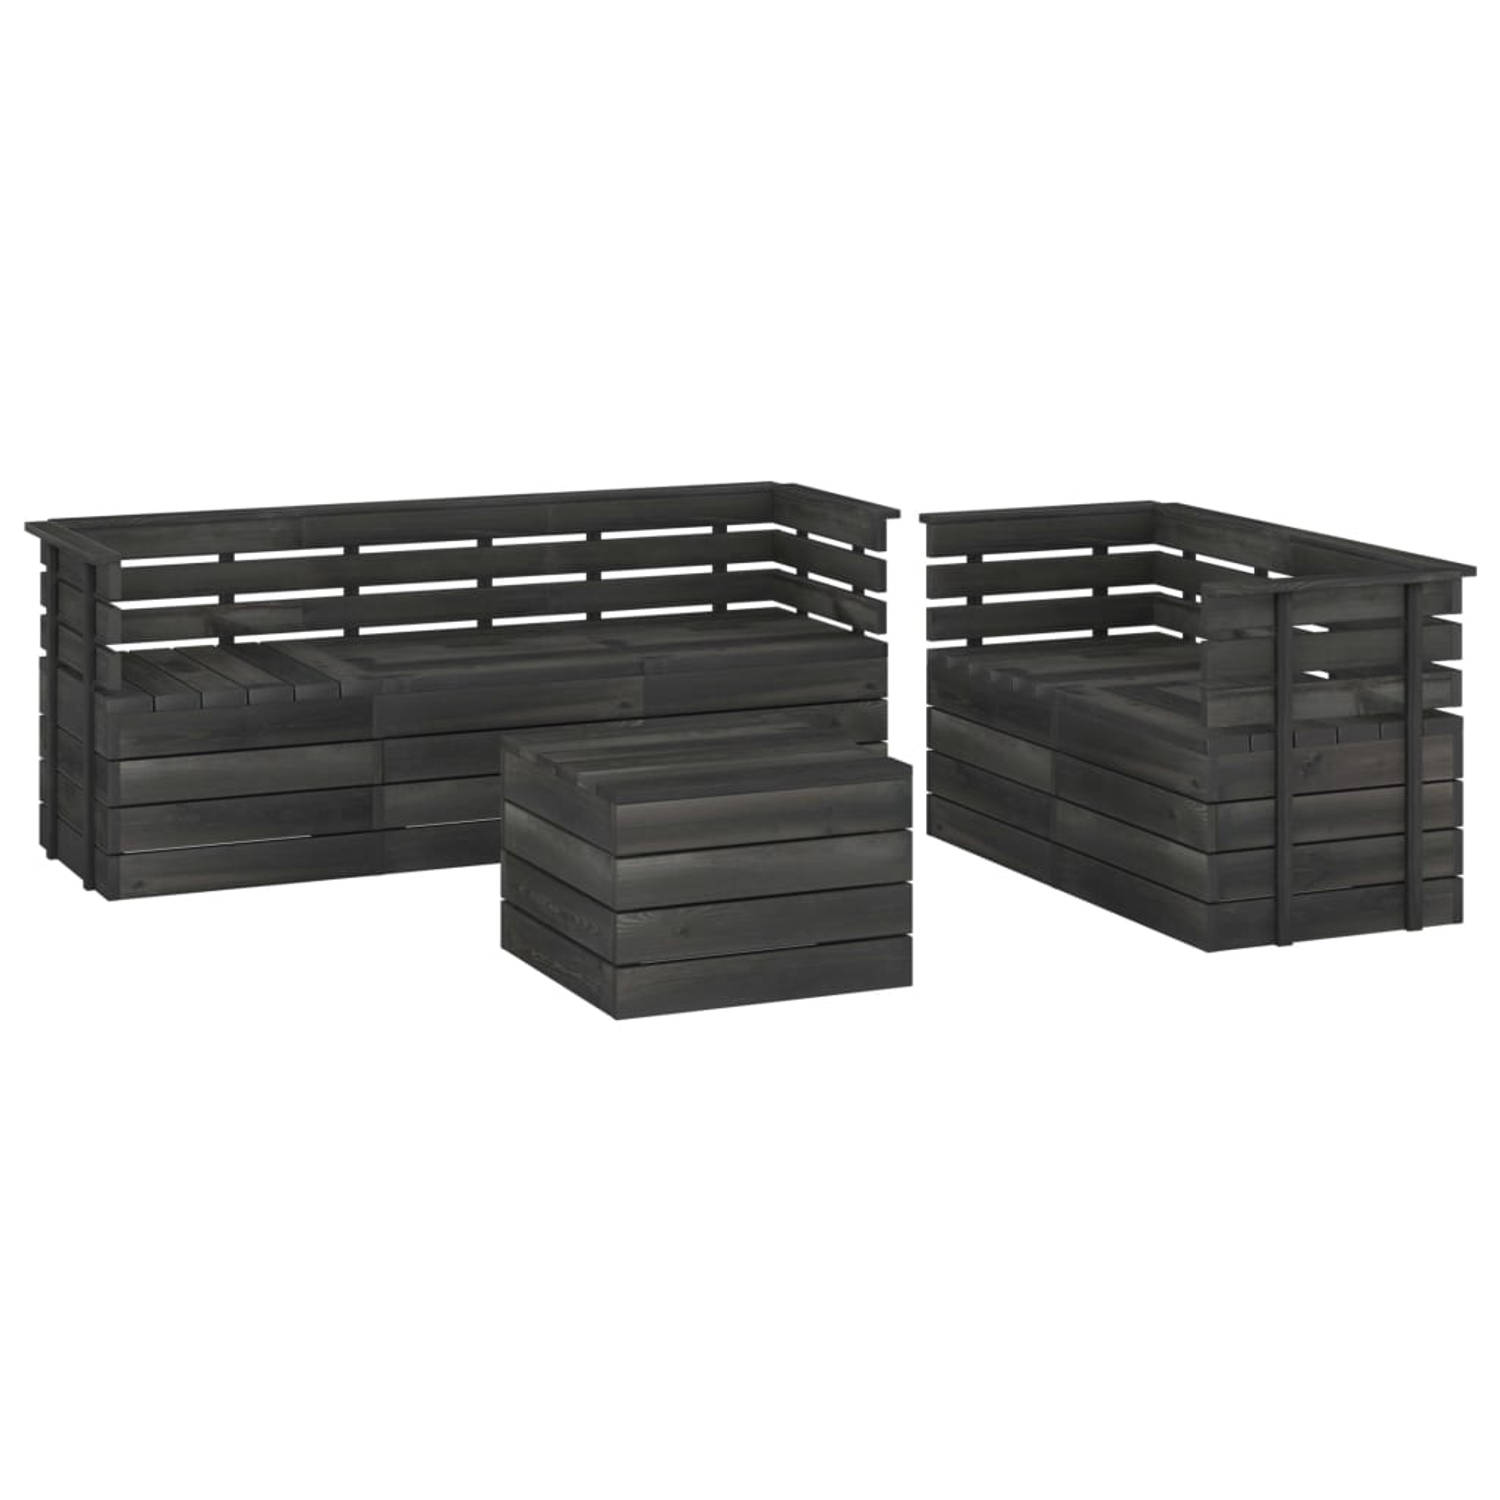 The Living Store 6-delige Loungeset pallet massief grenenhout donkergrijs - Tuinset